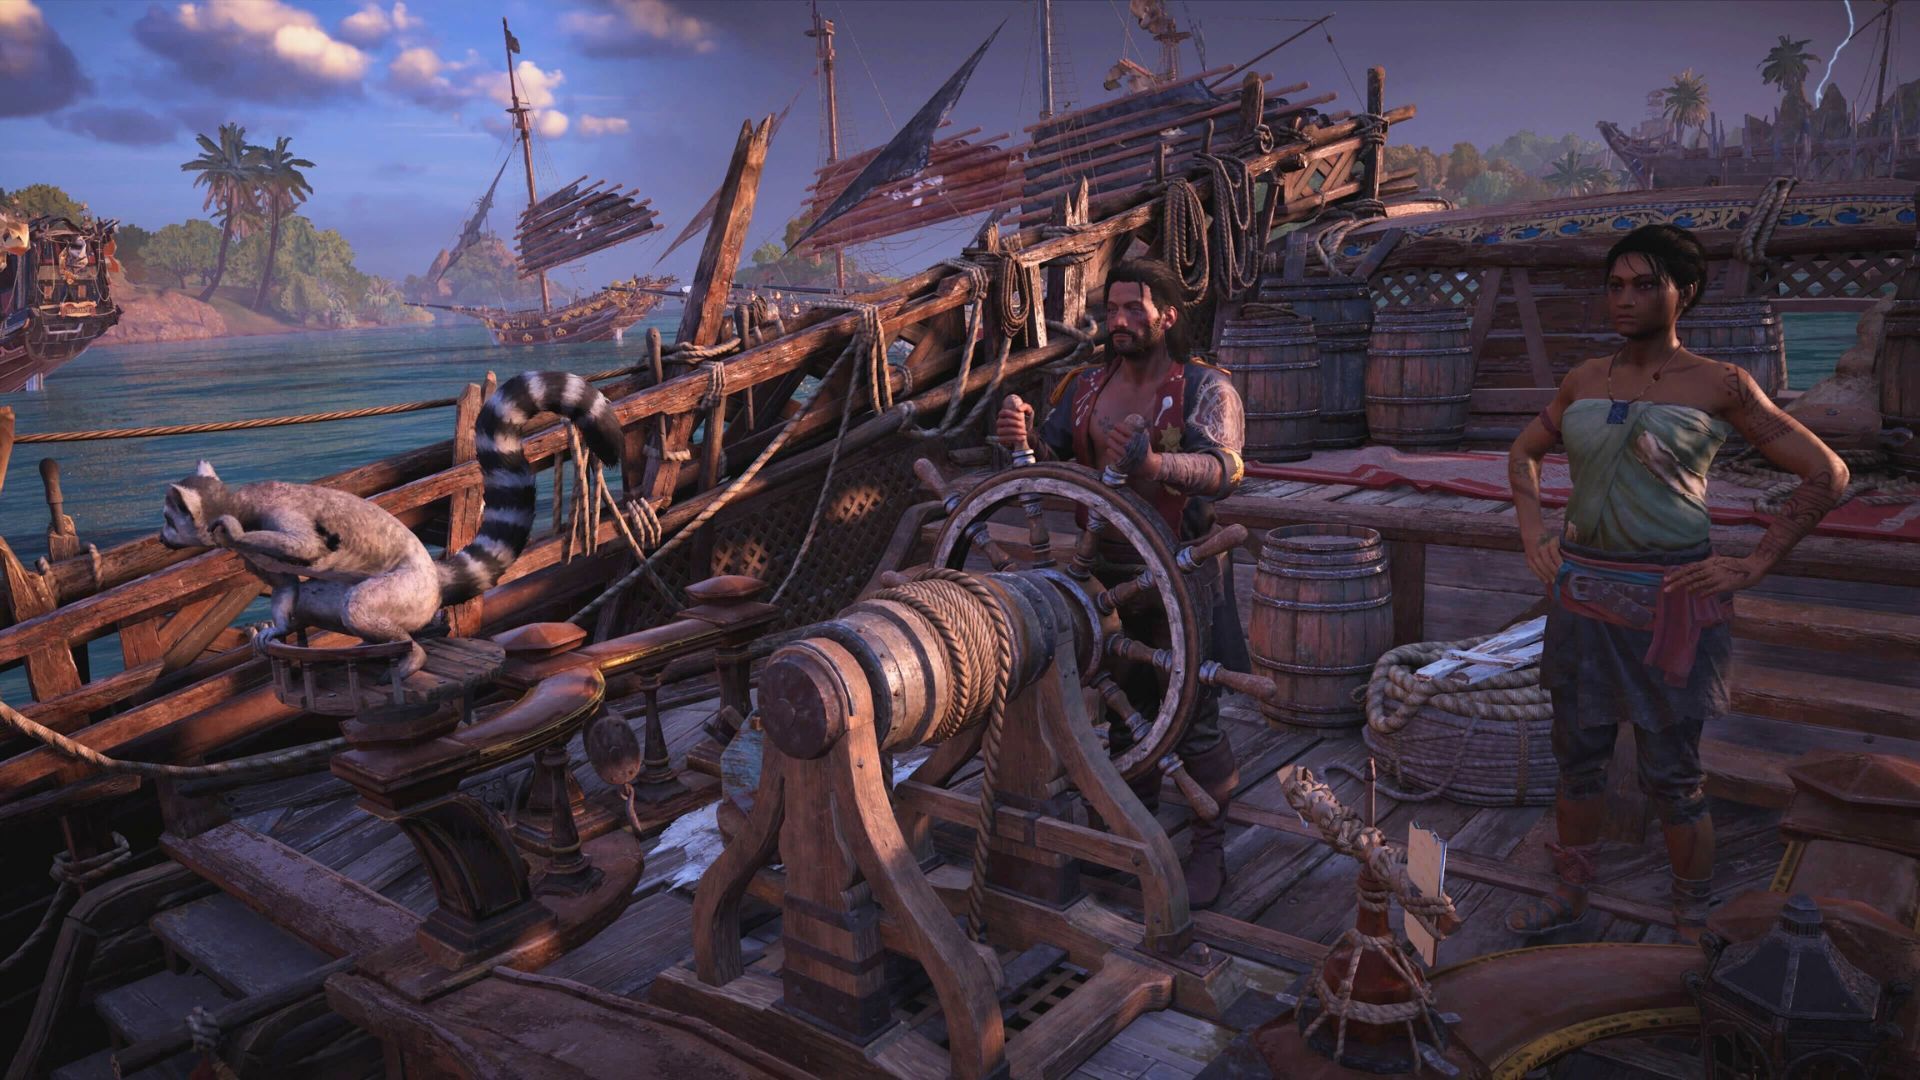 A Skull and Bones player standing behind the steering wheel of their ship